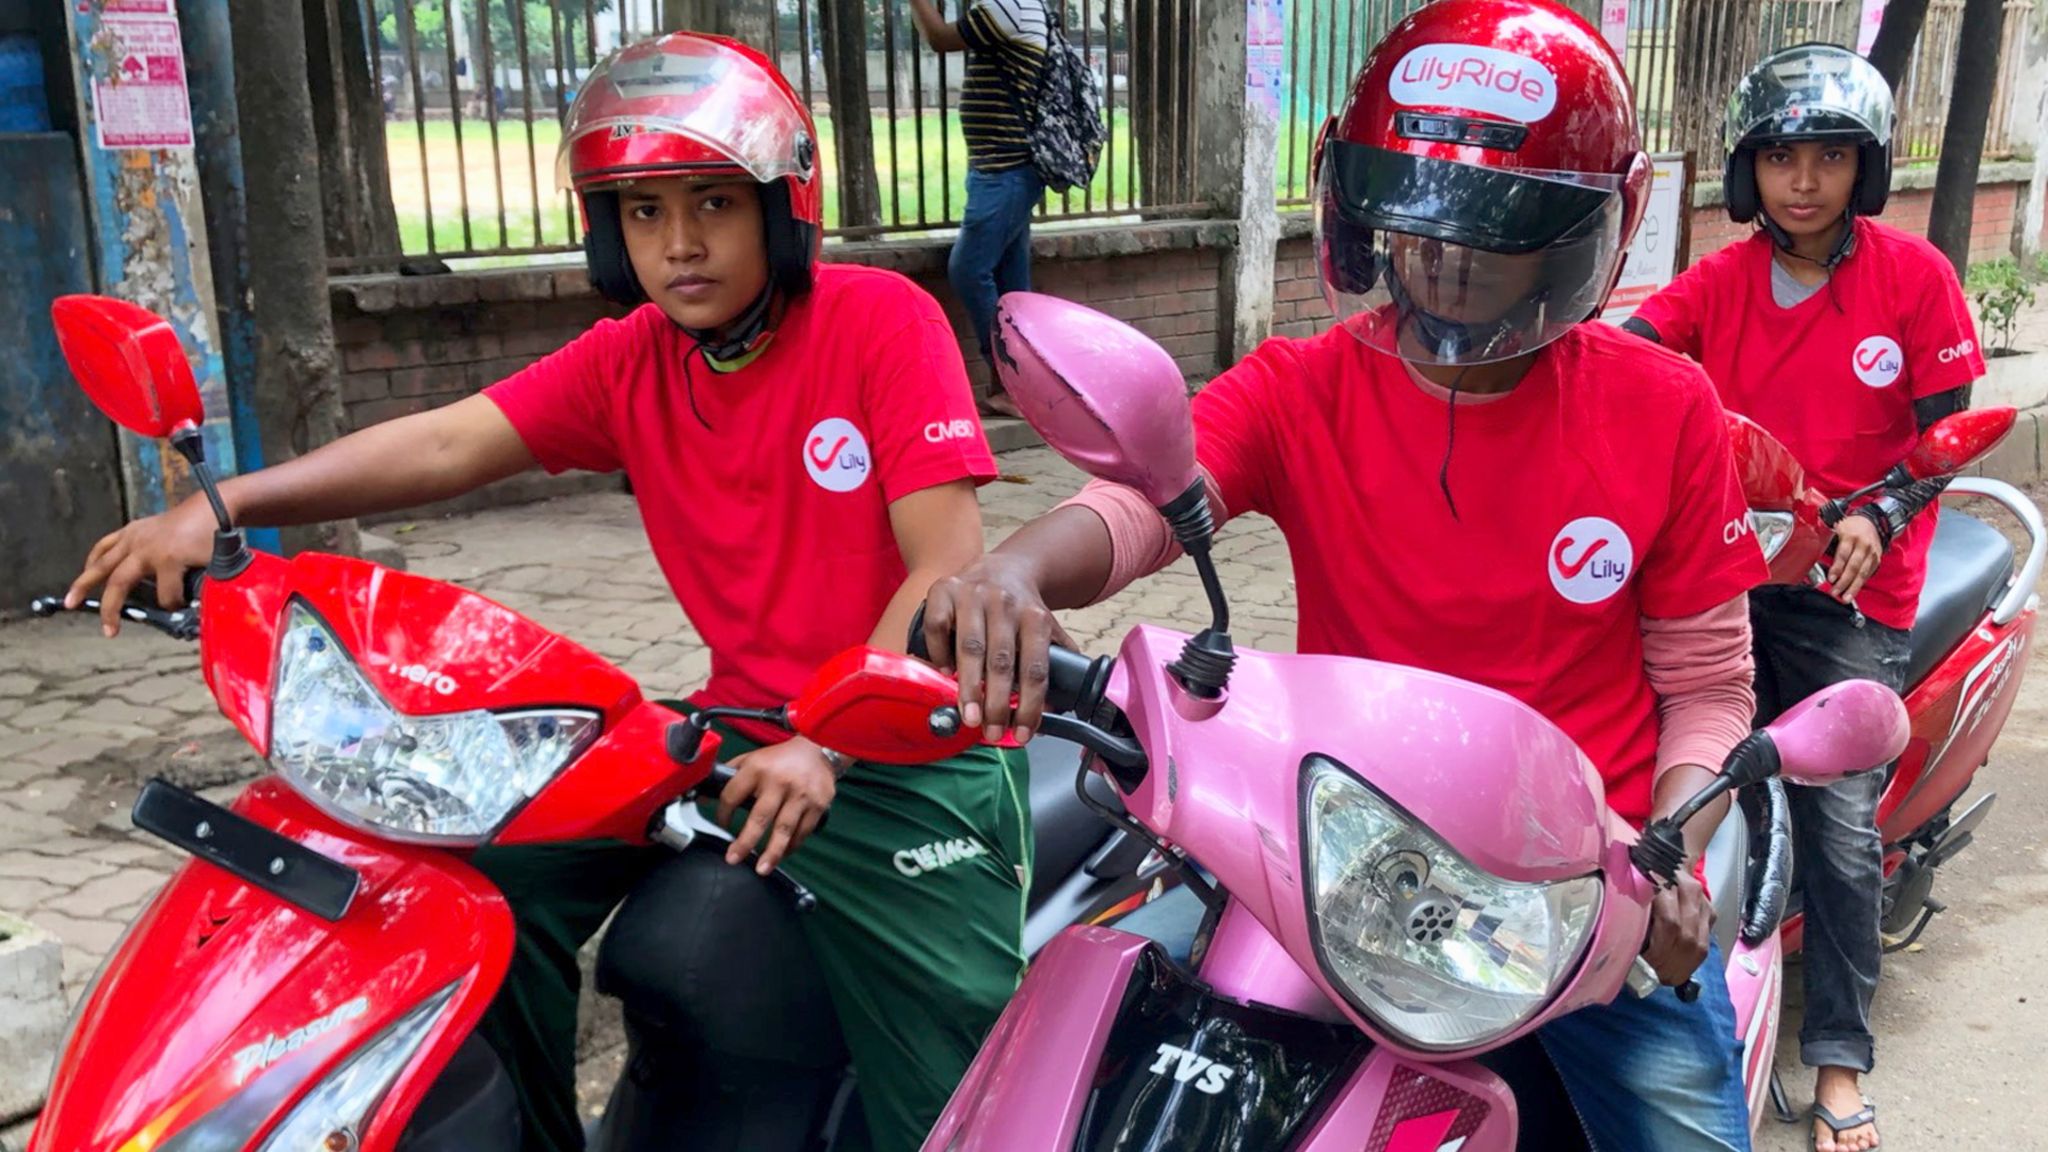 3 women scooter driver